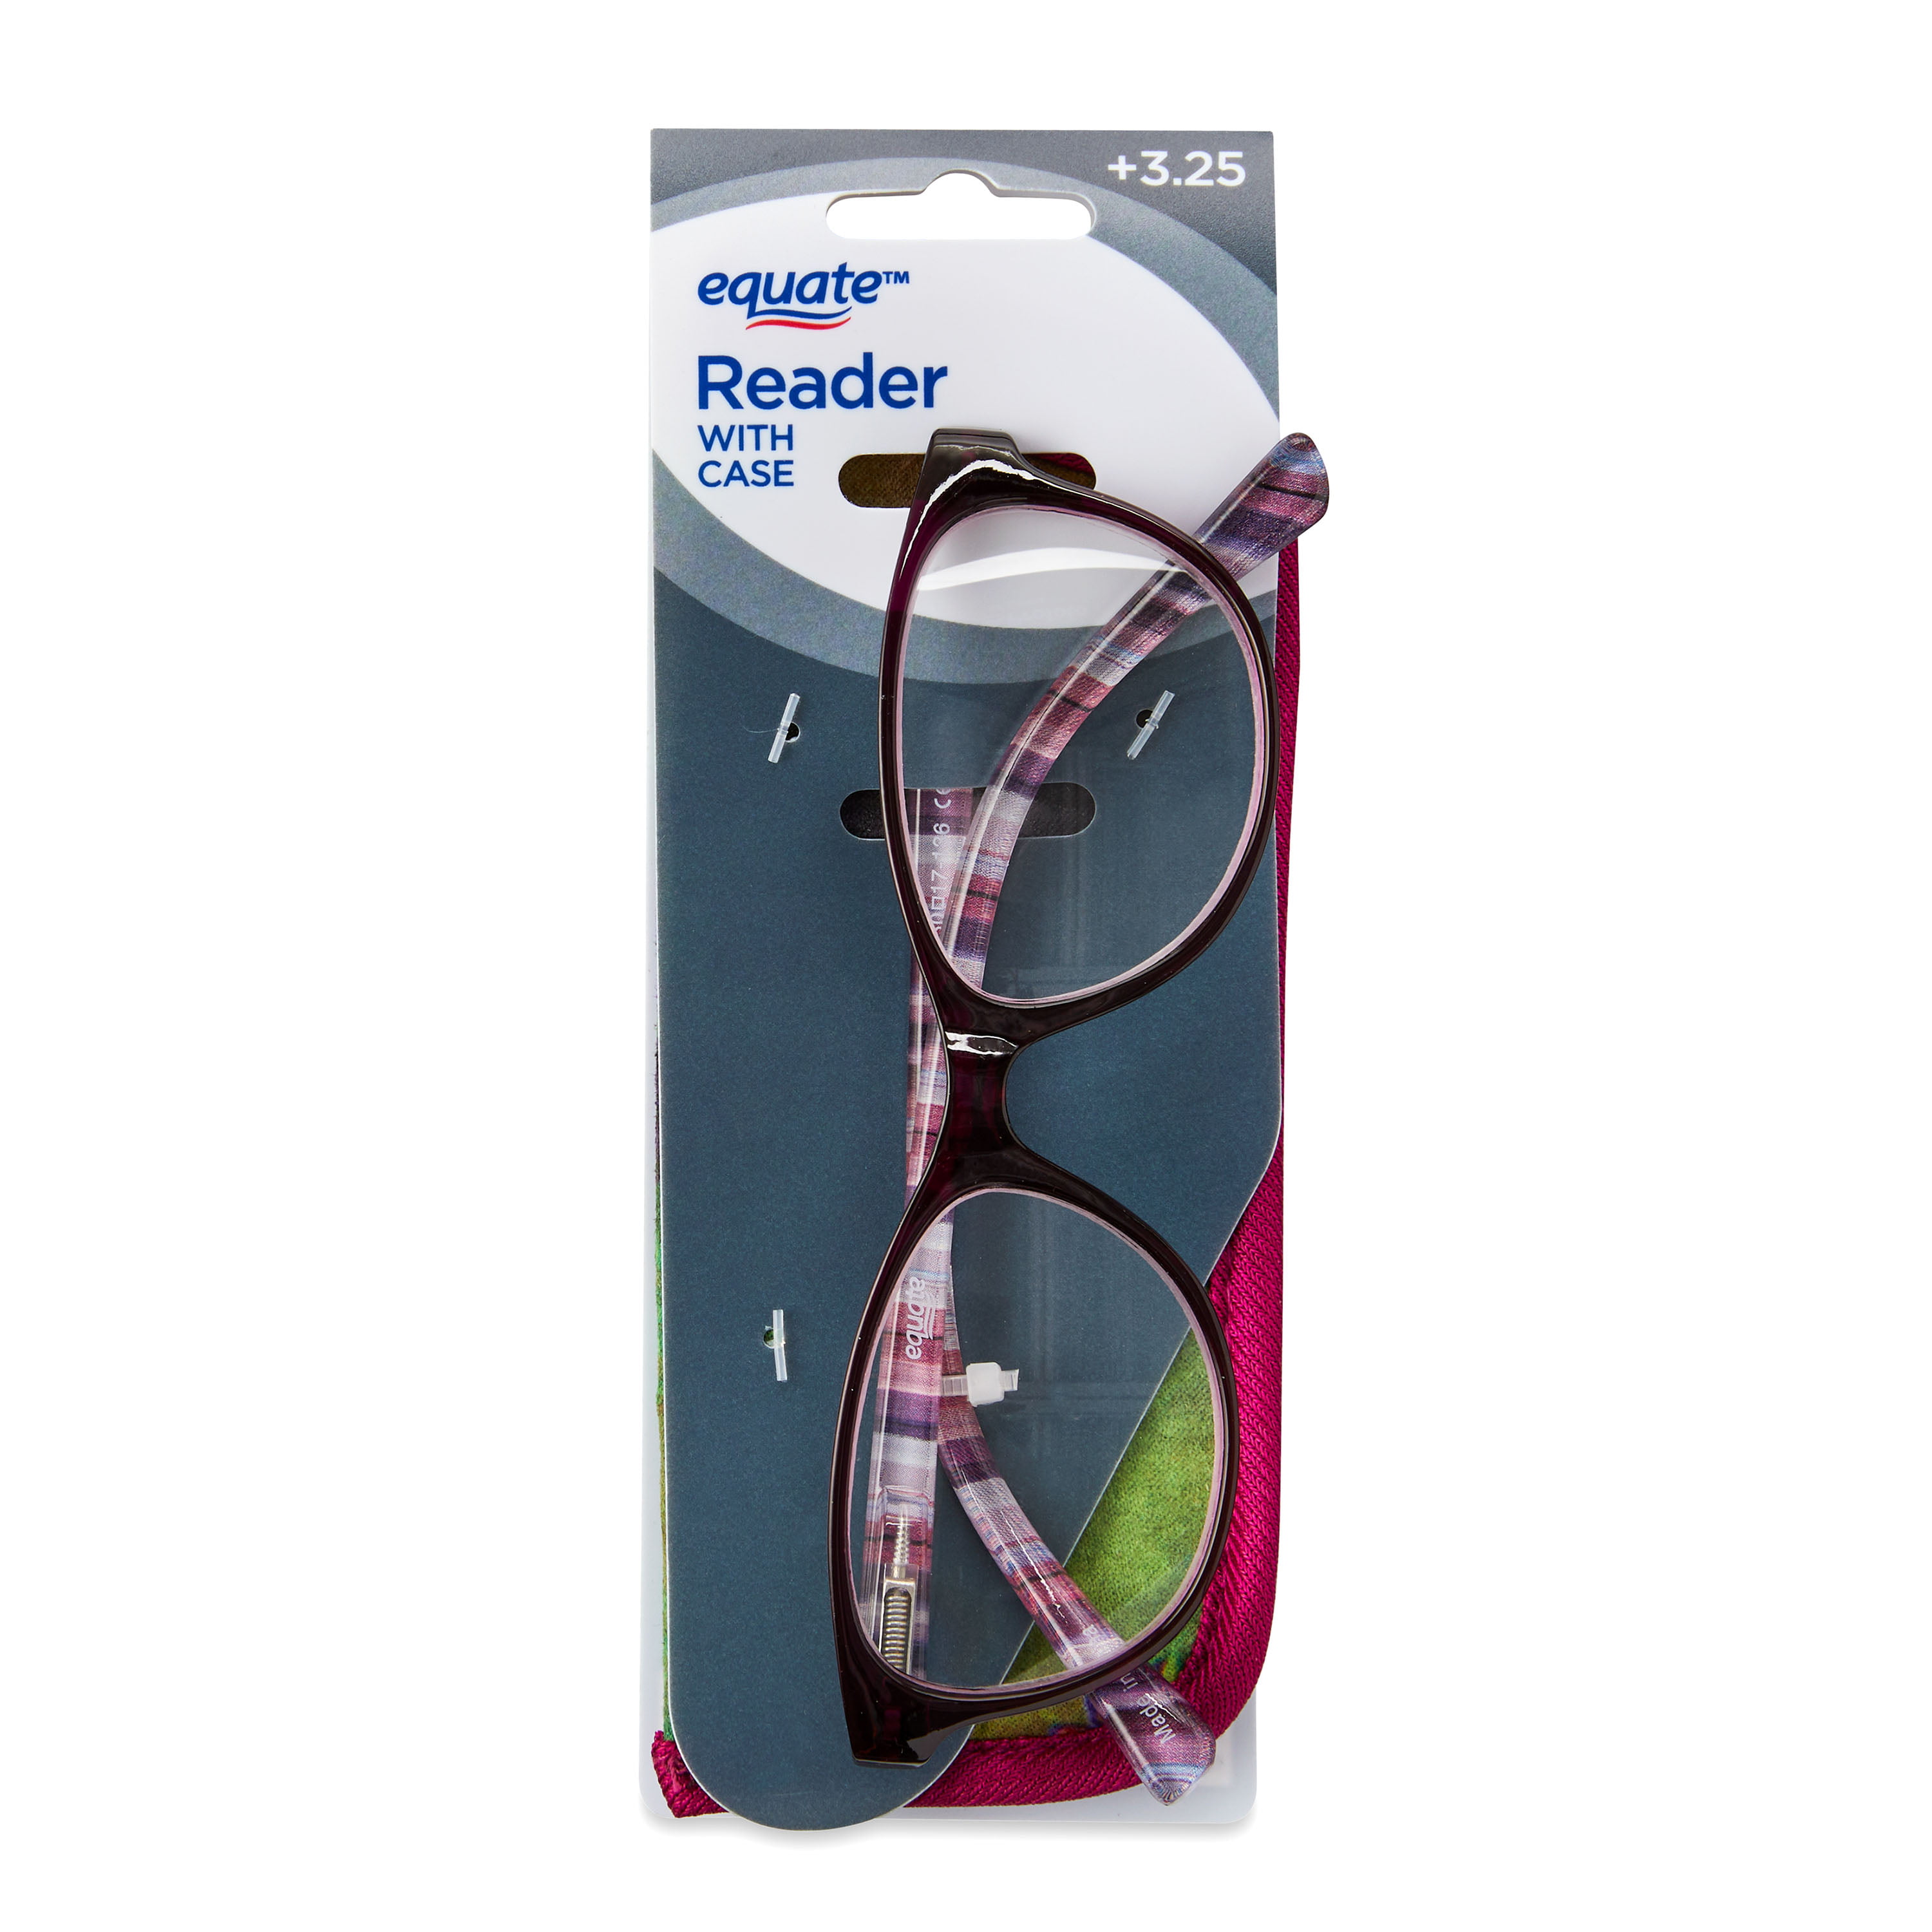 Equate Women's Heather Oval Reading Glasses with Case, Purple, +1.25 